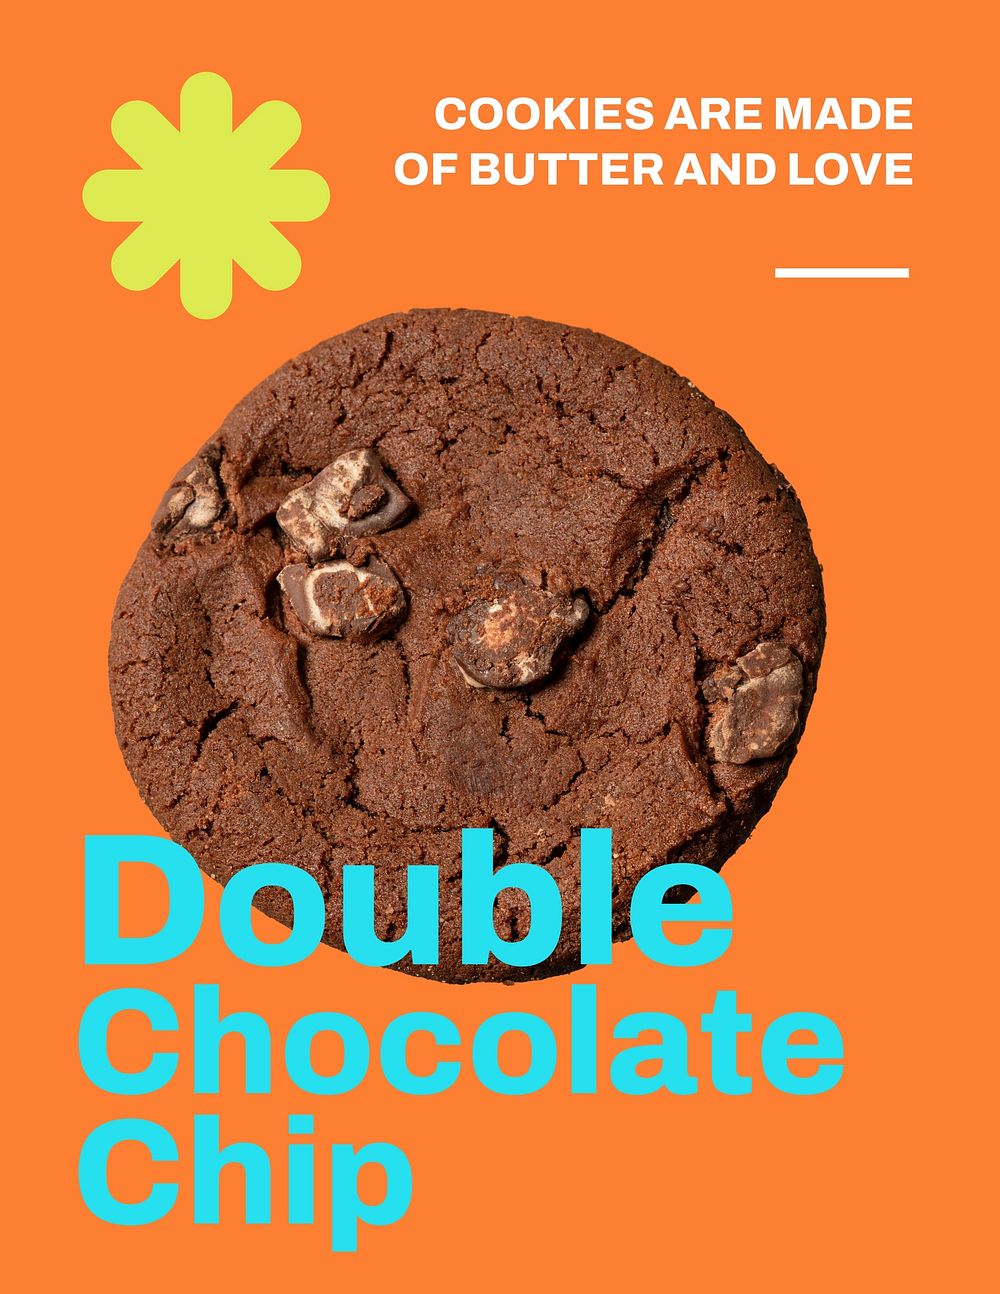 Chocolate cookie flyer editable template, dessert quote